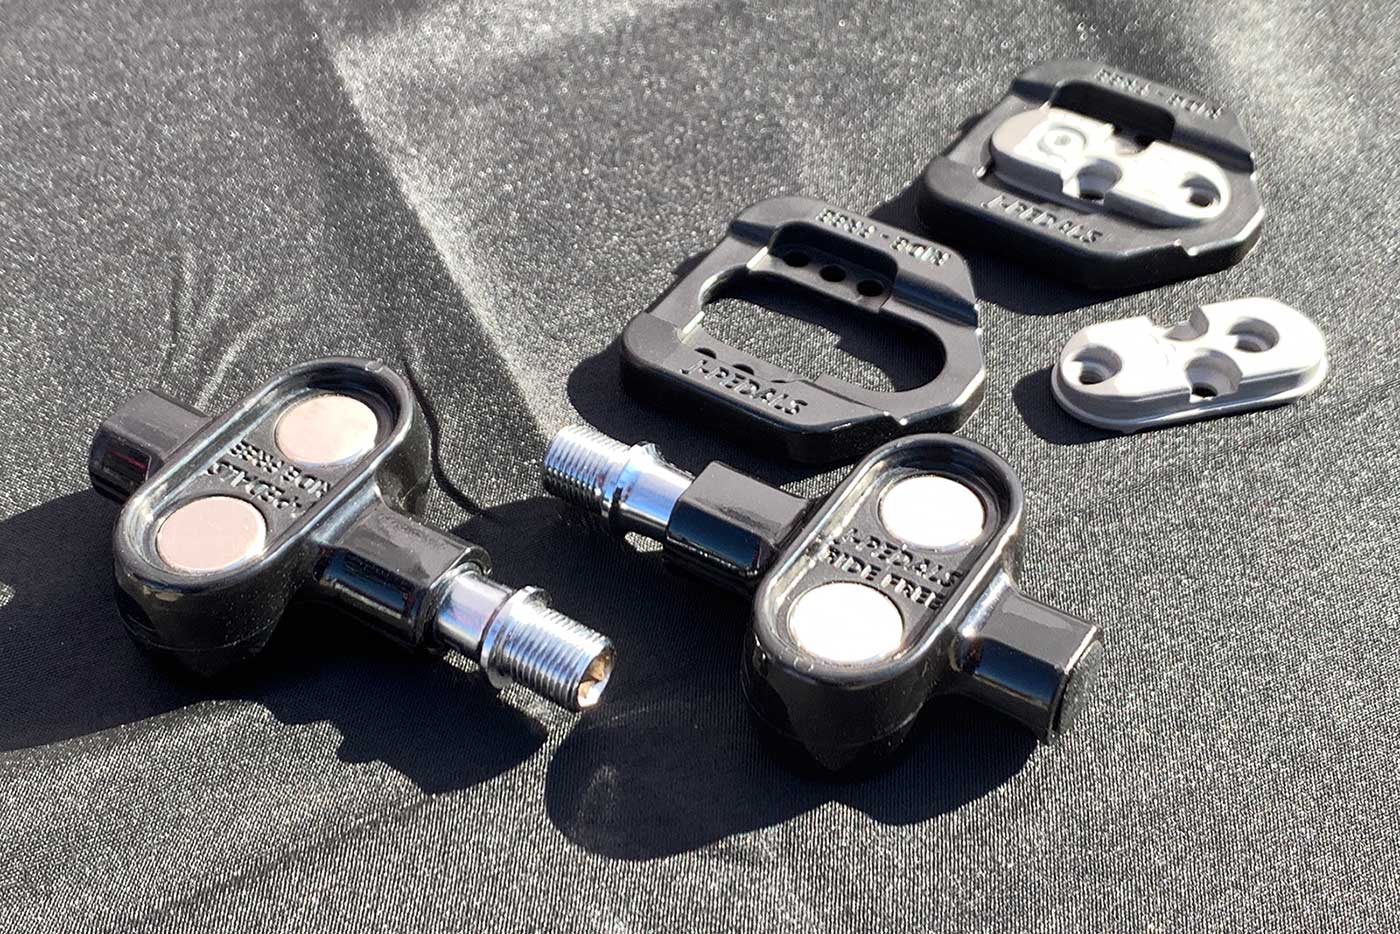 j-pedals magnetic clipless pedals for road and mountain bikes